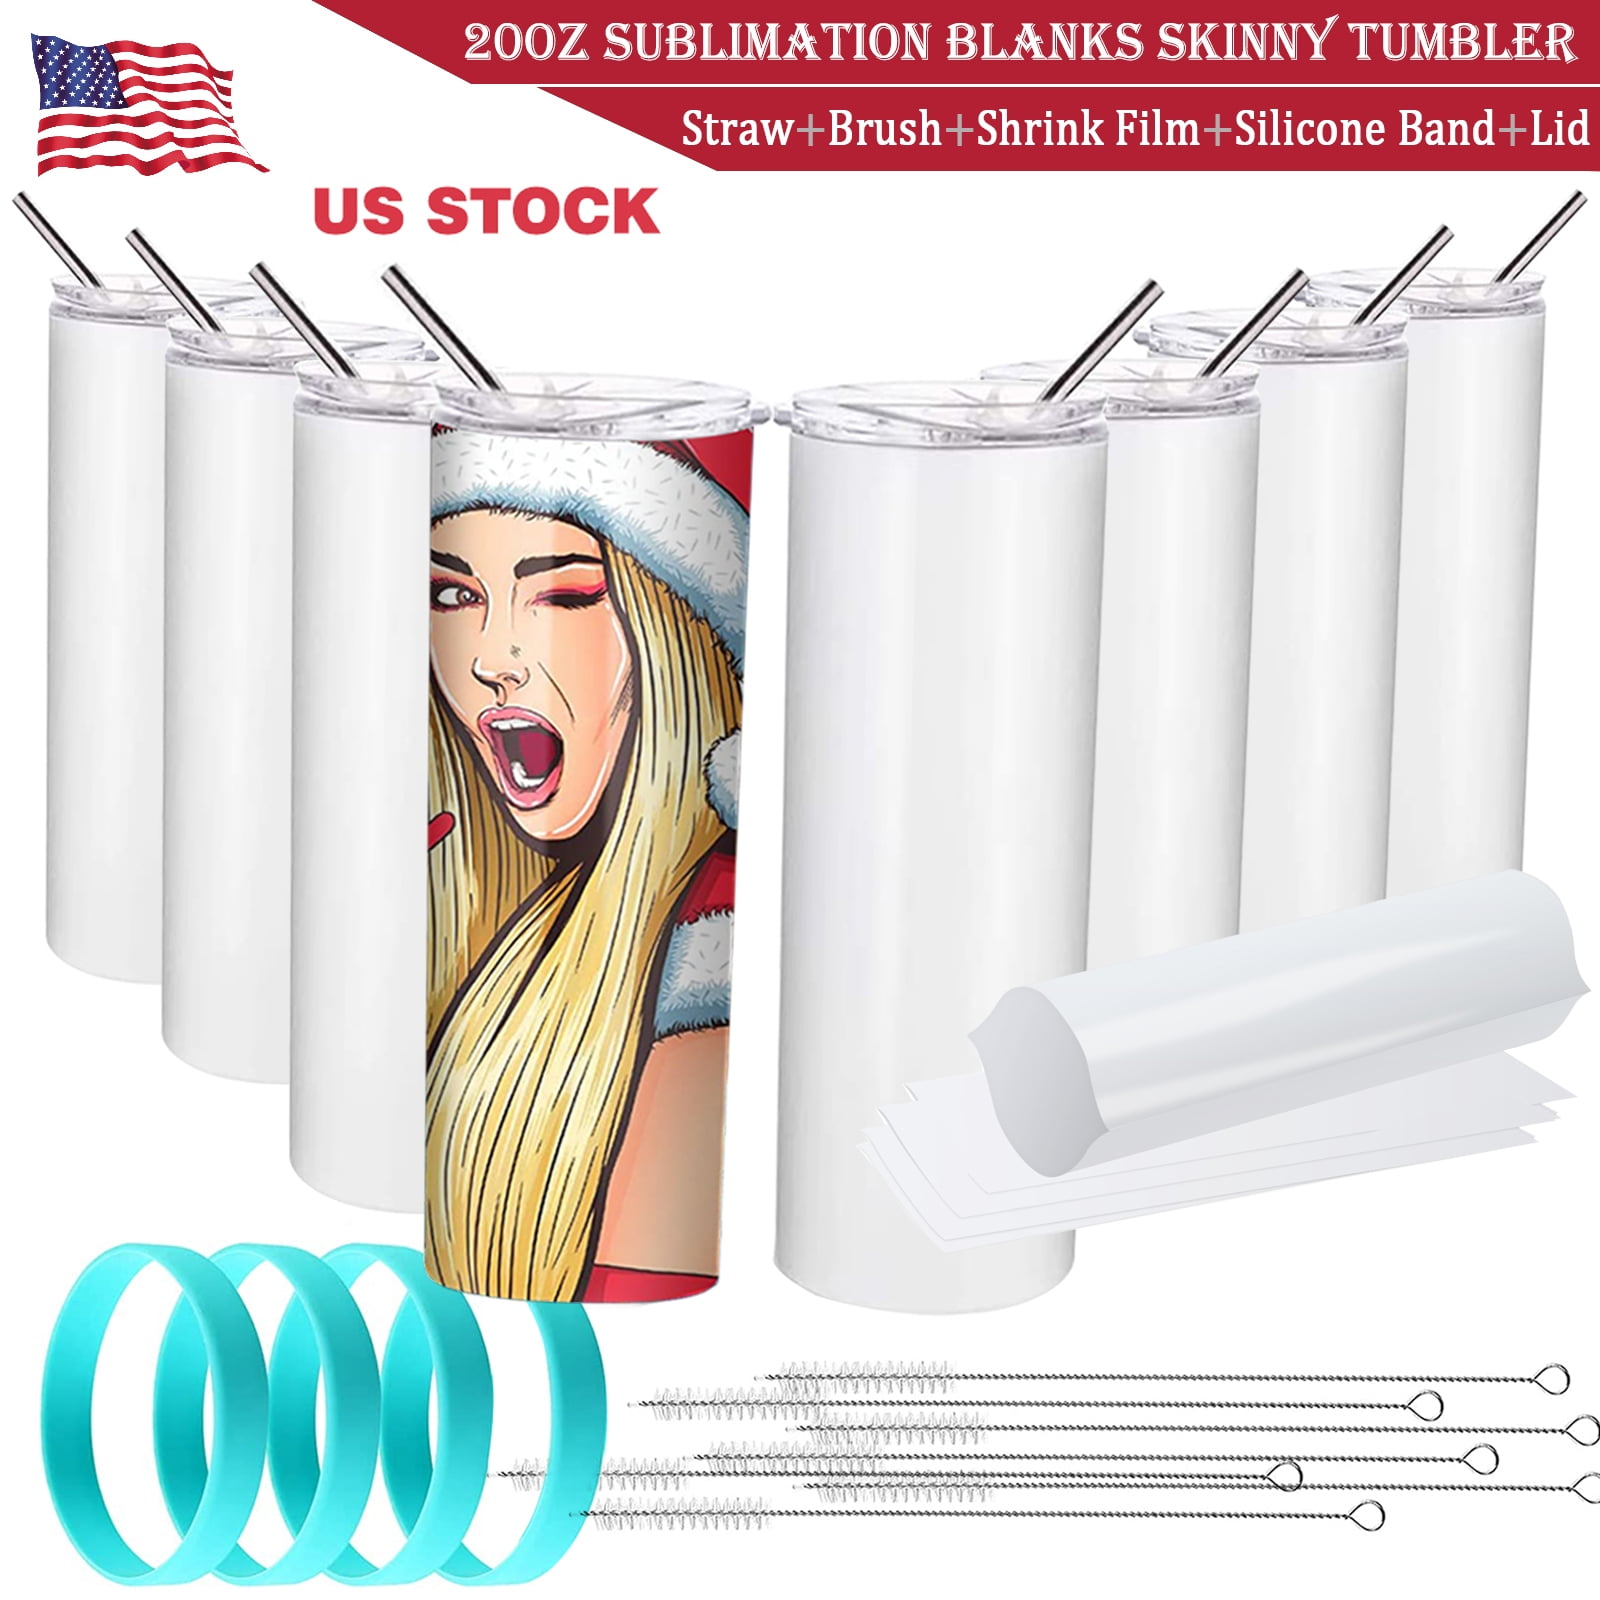 PINKSODIUM 8 Pack Sublimation Tumblers bulk 20 oz Skinny Straight  Sublimation Blanks 20oz Double Wall Insulated White Stainless Steel Tumbler  Cups with lids polymer coating for heat transfer 8 Count (Pack of 1)